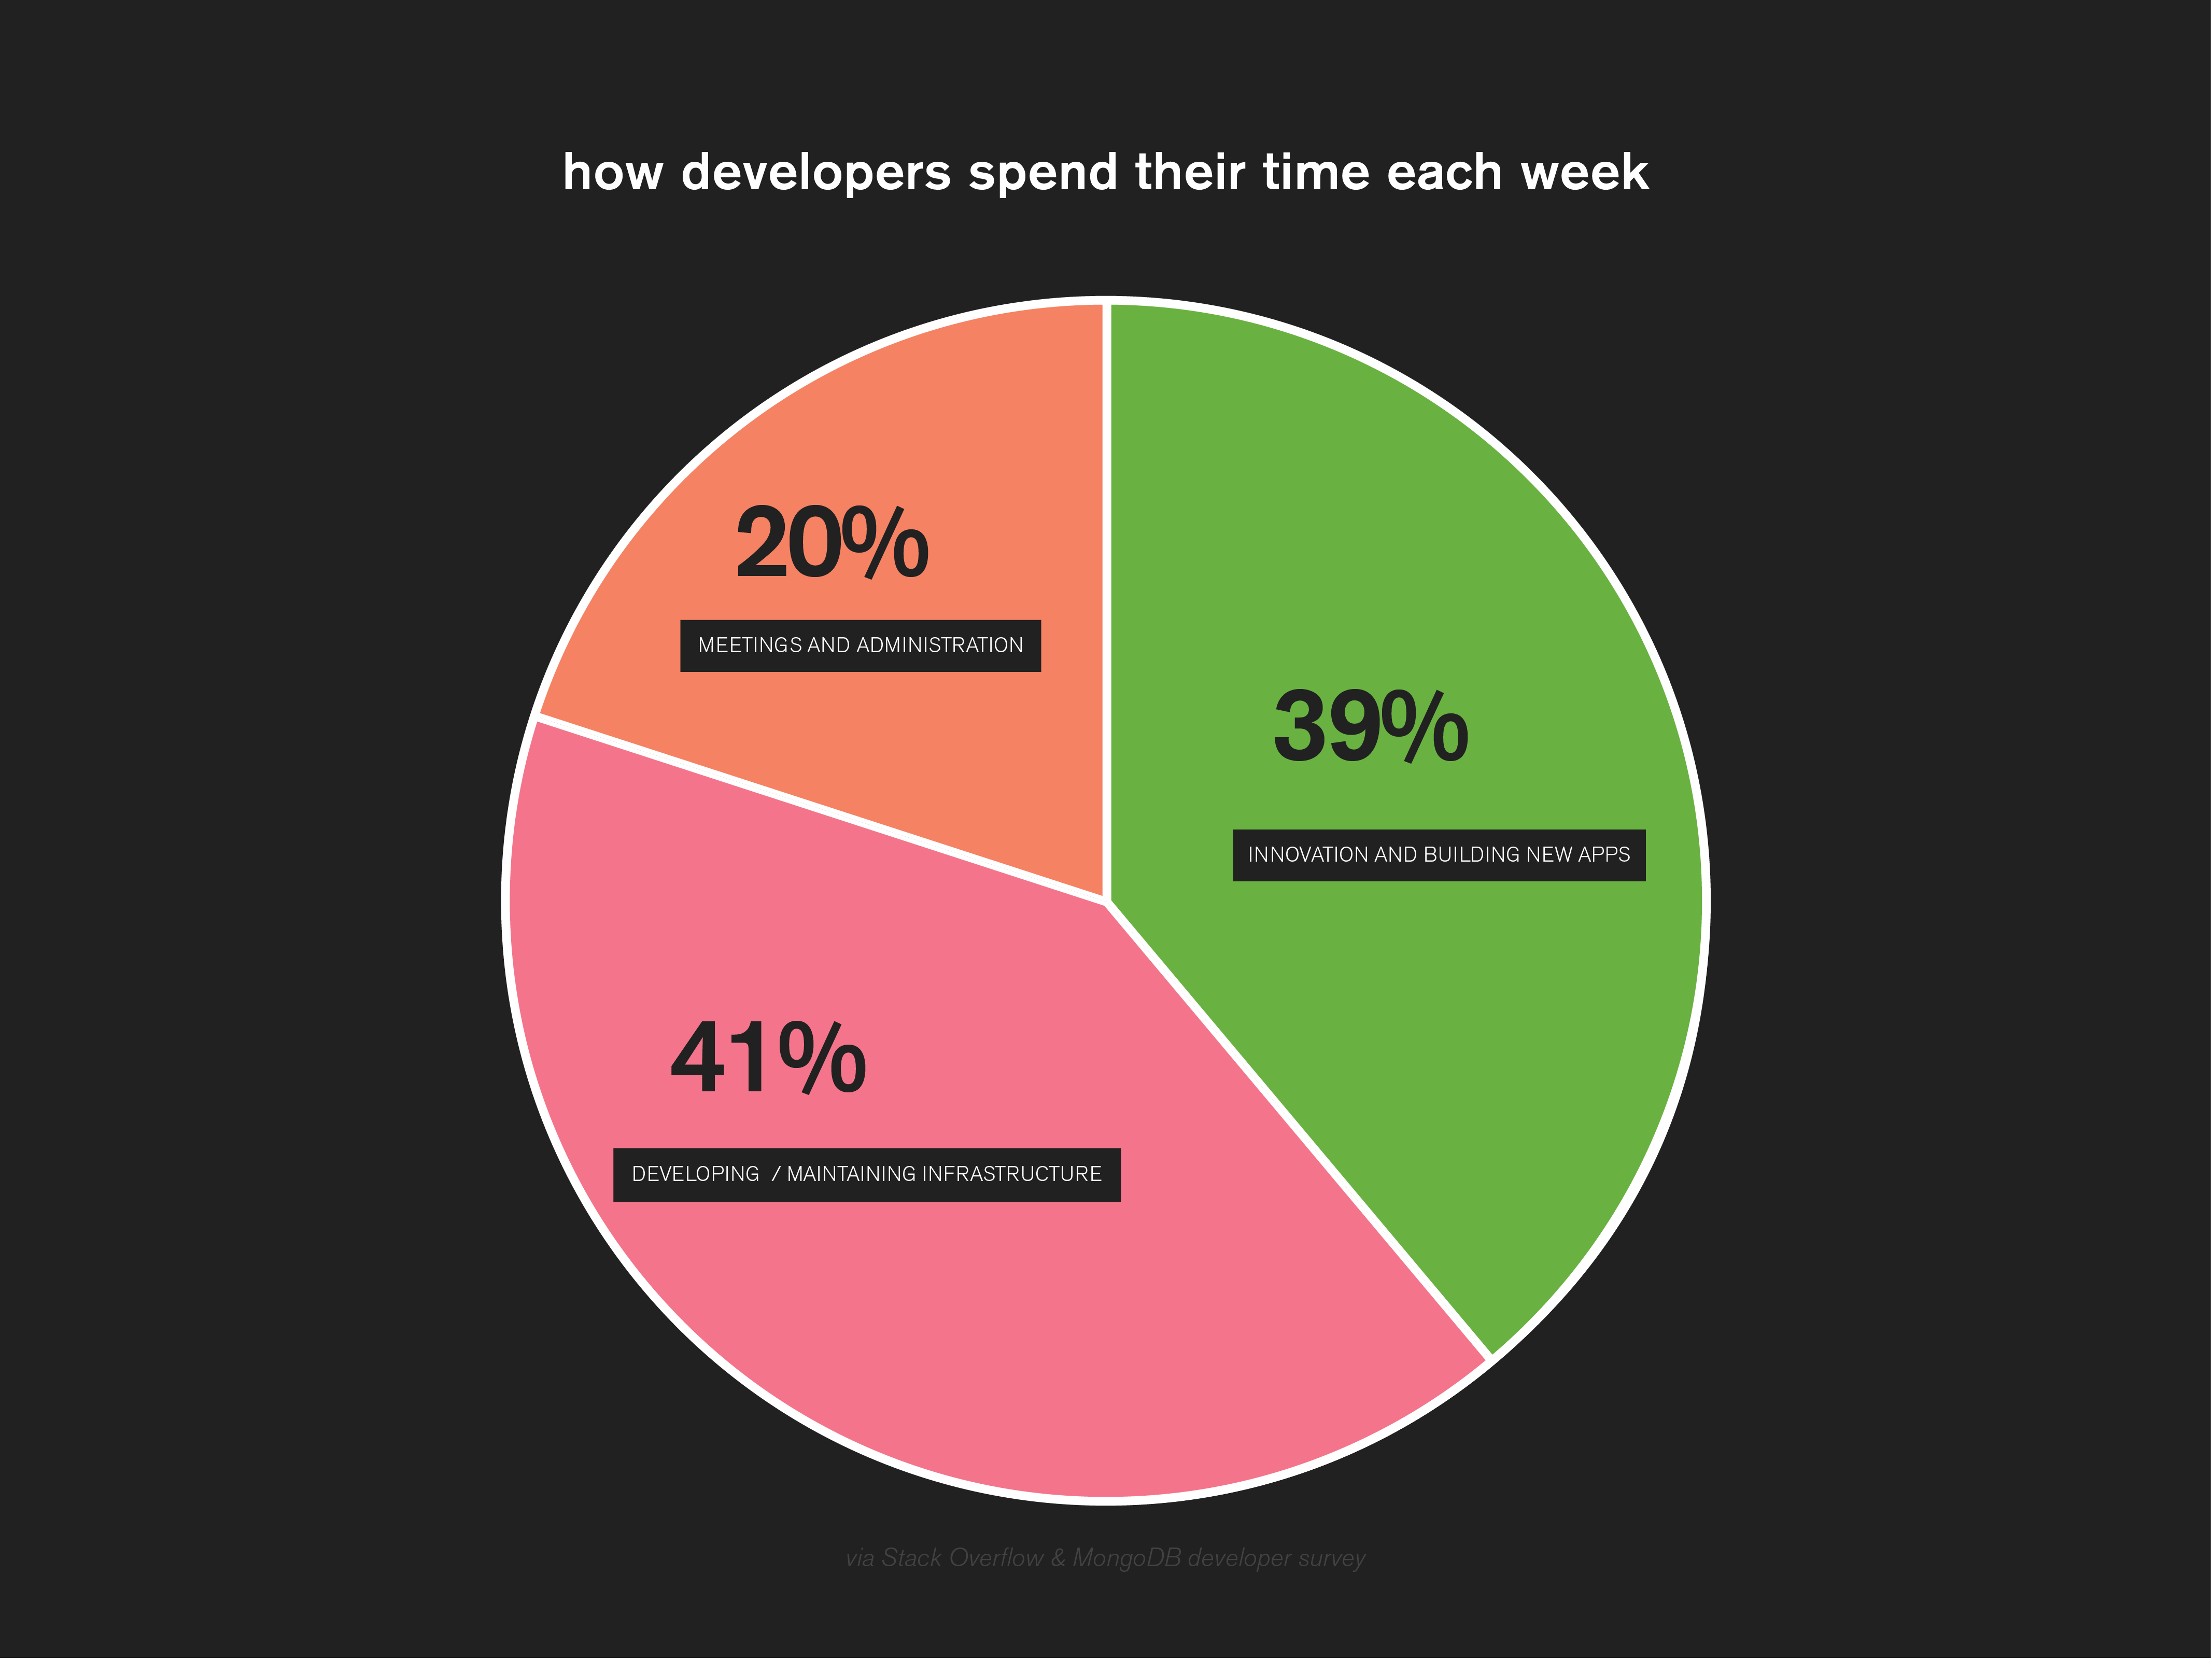 How developers spend their time each week